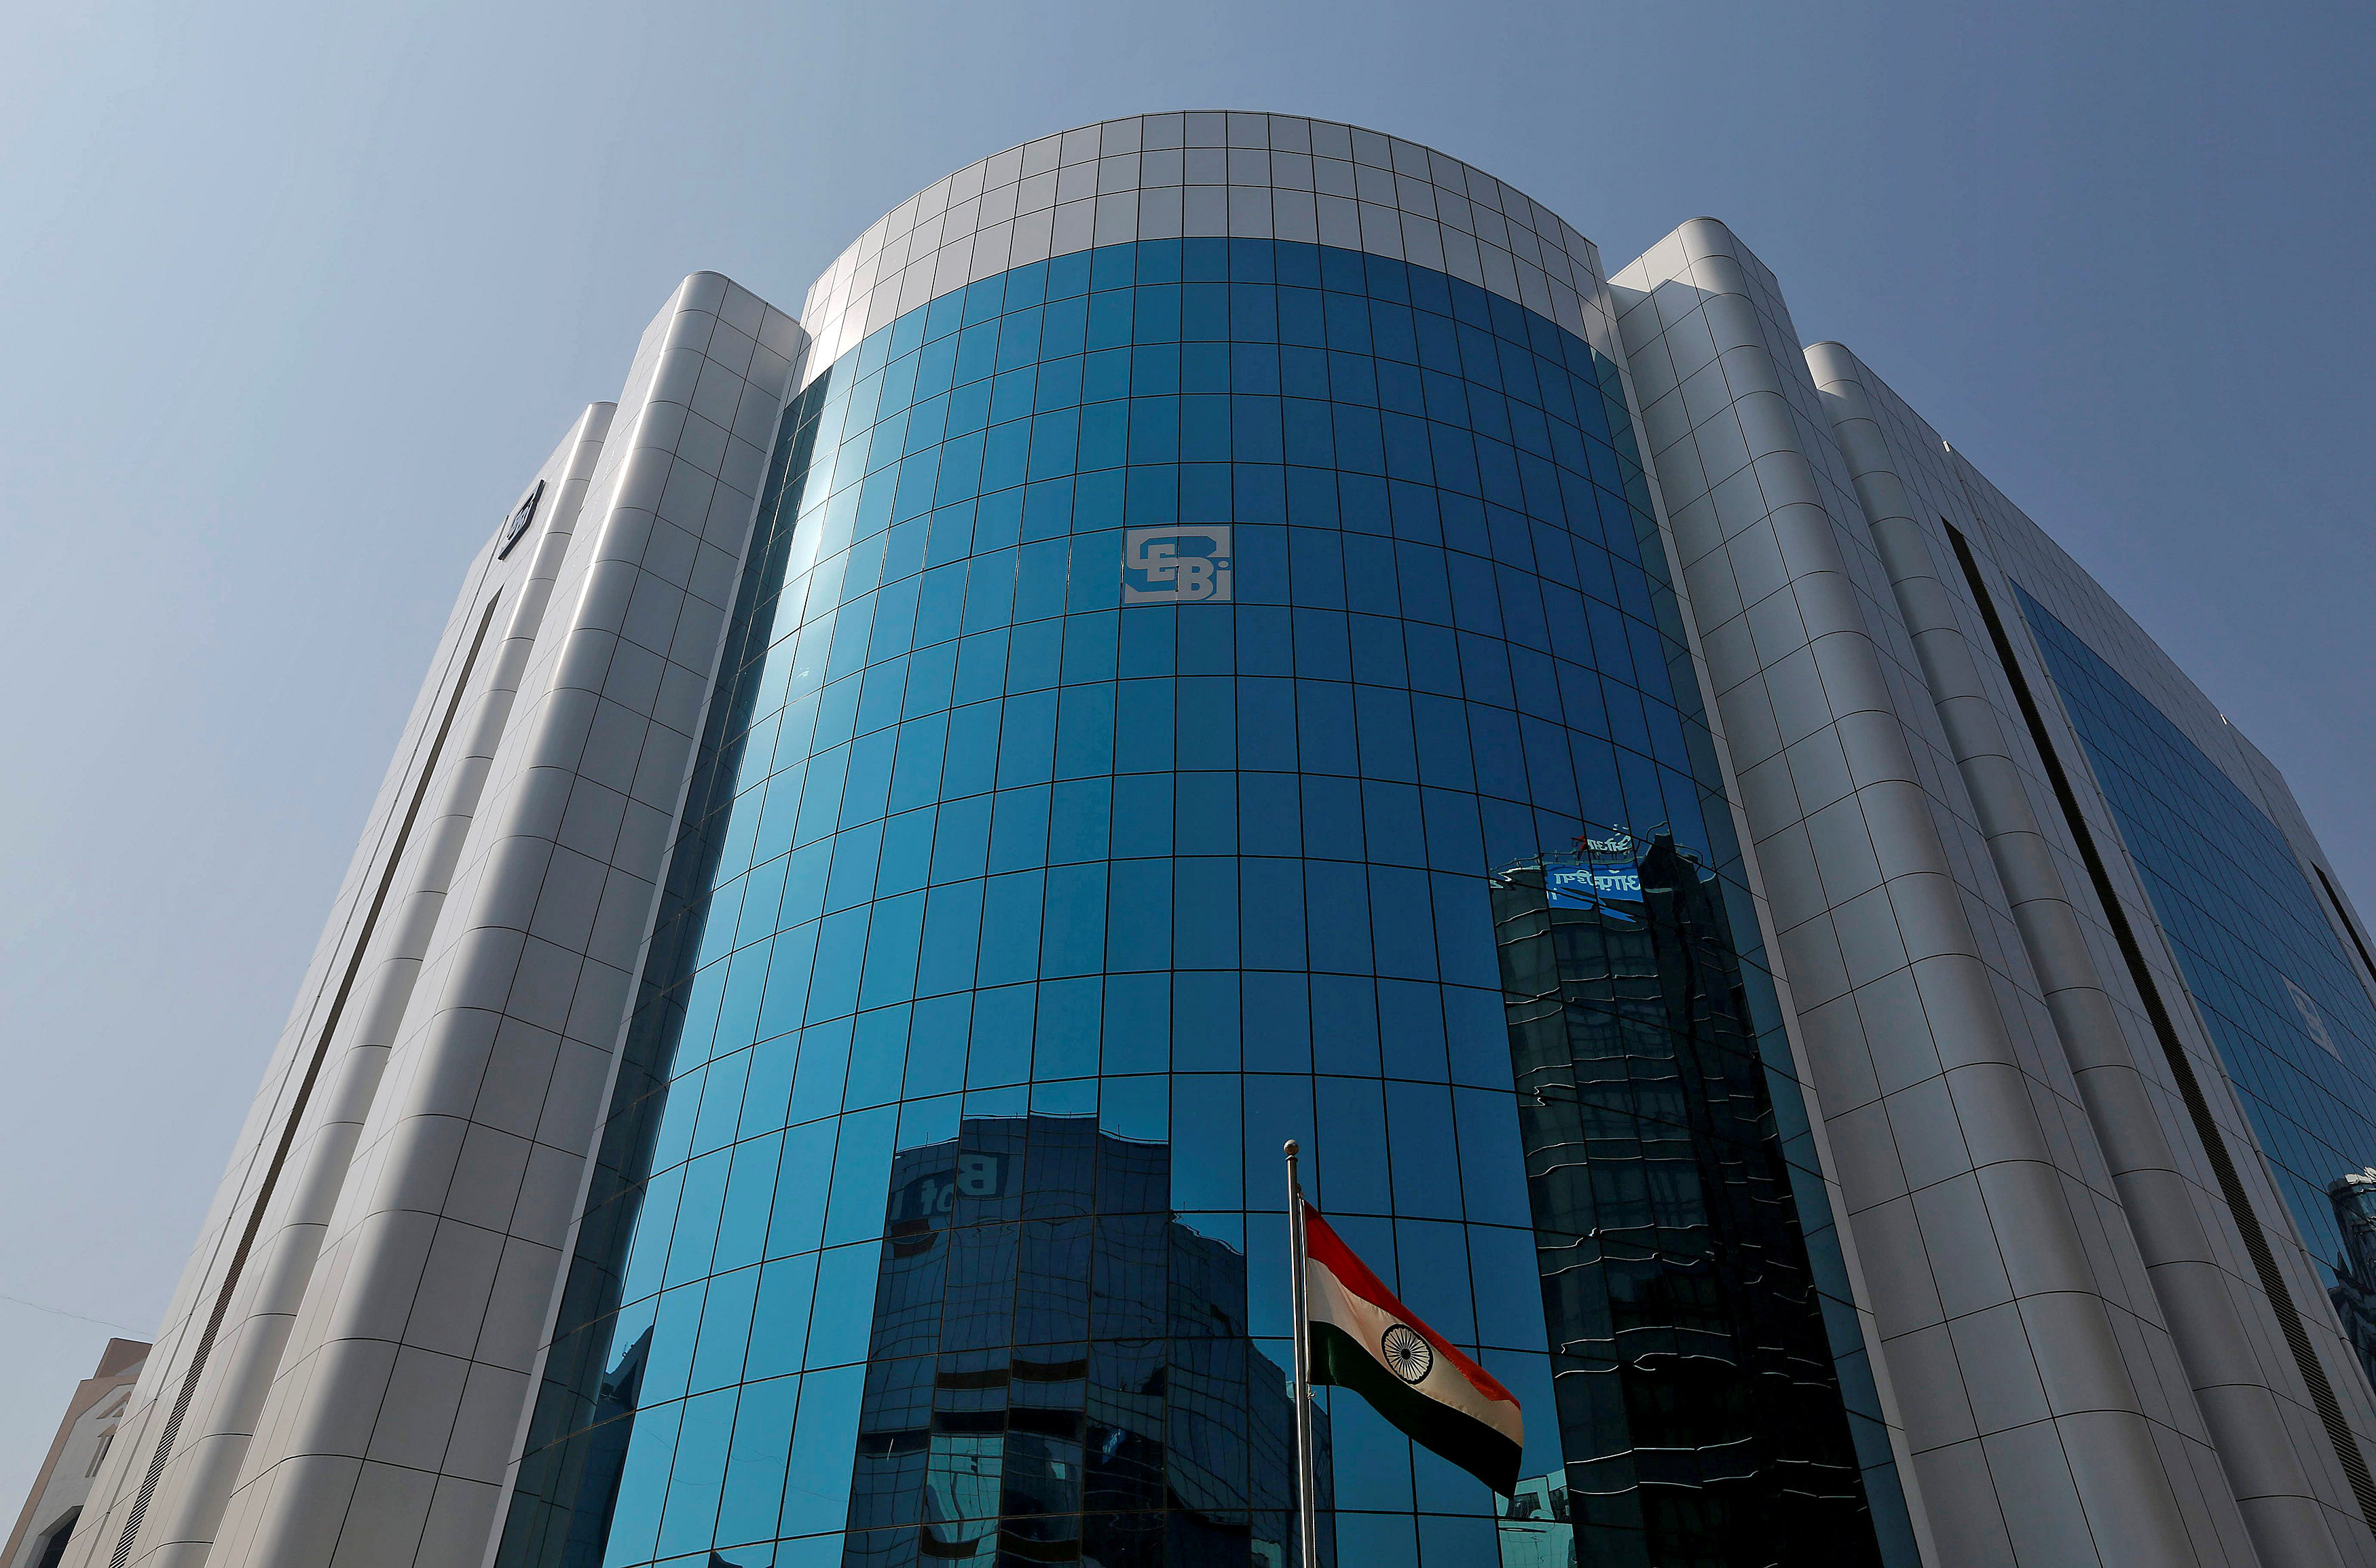 The logo of the Securities and Exchange Board of India (SEBI) is seen on the facade of its headquarters building in Mumbai. (Reuters Photo)